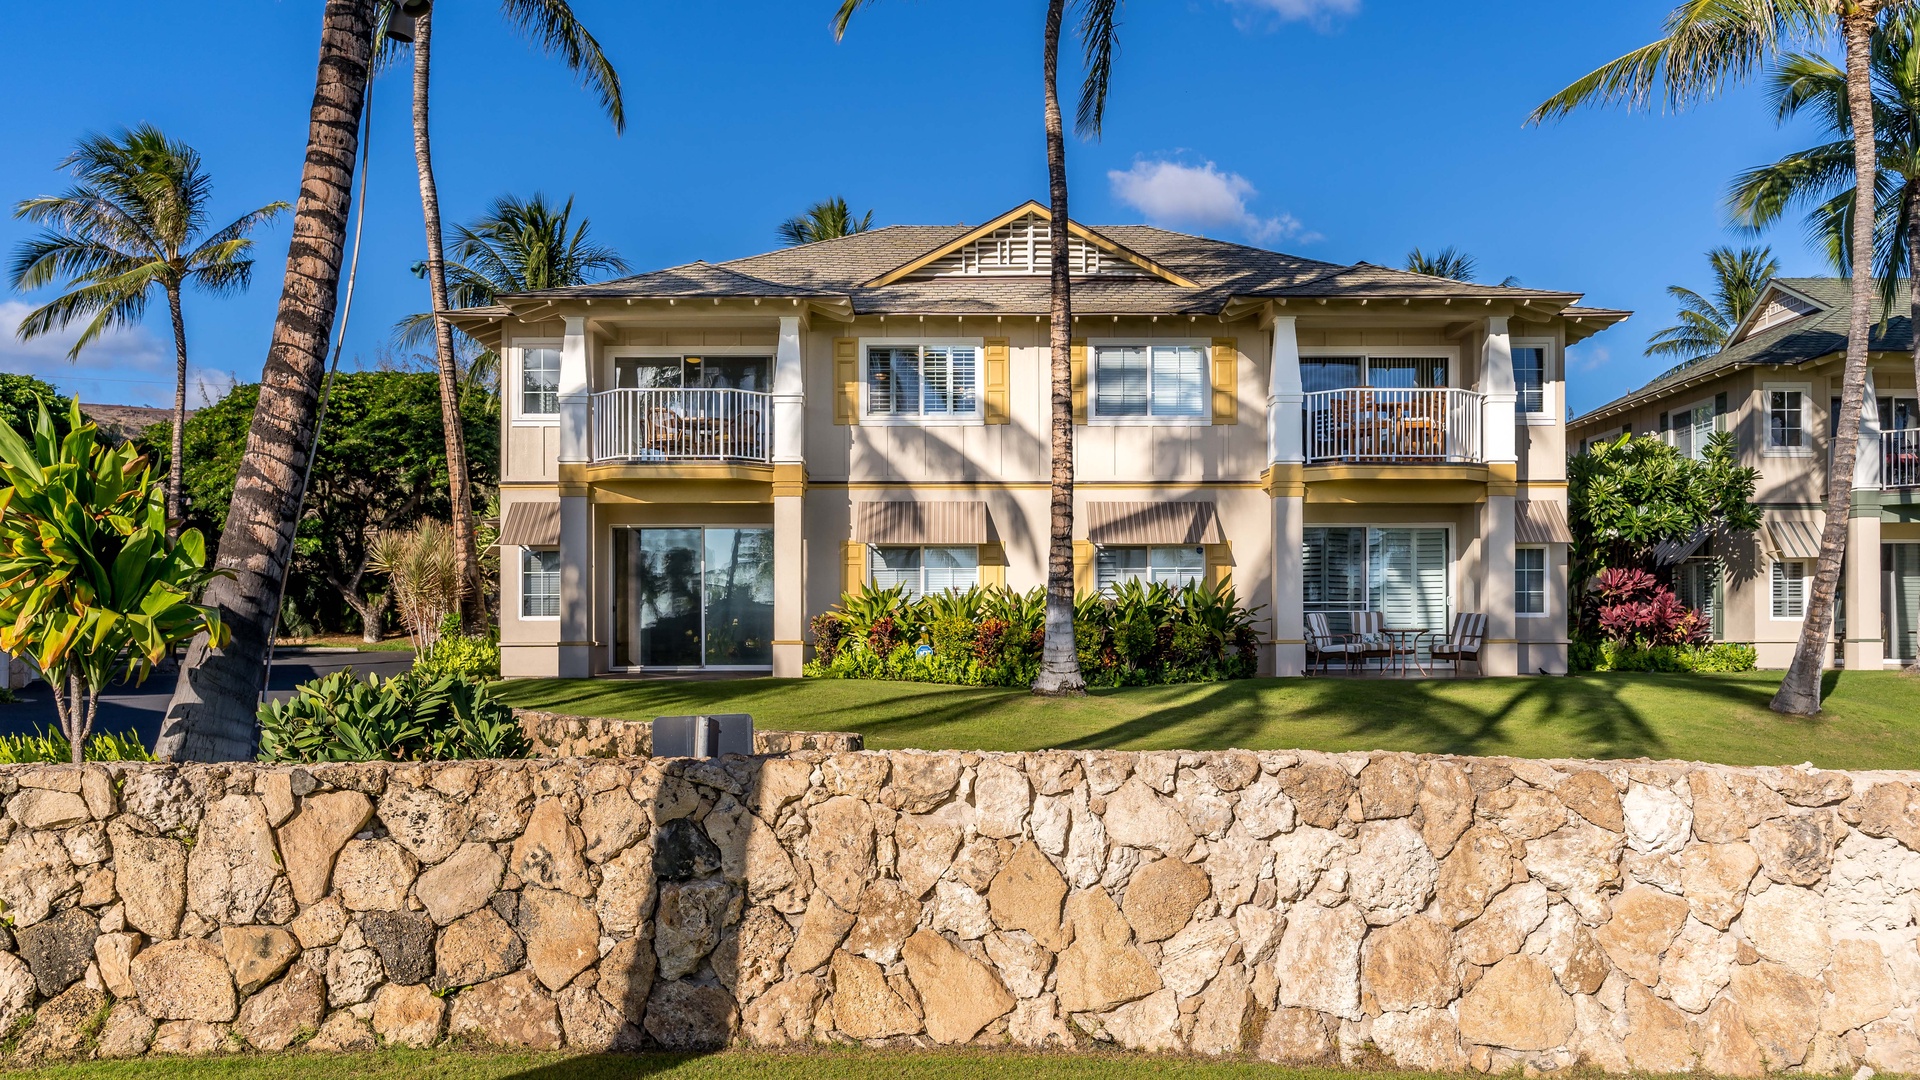 Kapolei Vacation Rentals, Kai Lani 16C - Life in the tropics with scenic accommodations.